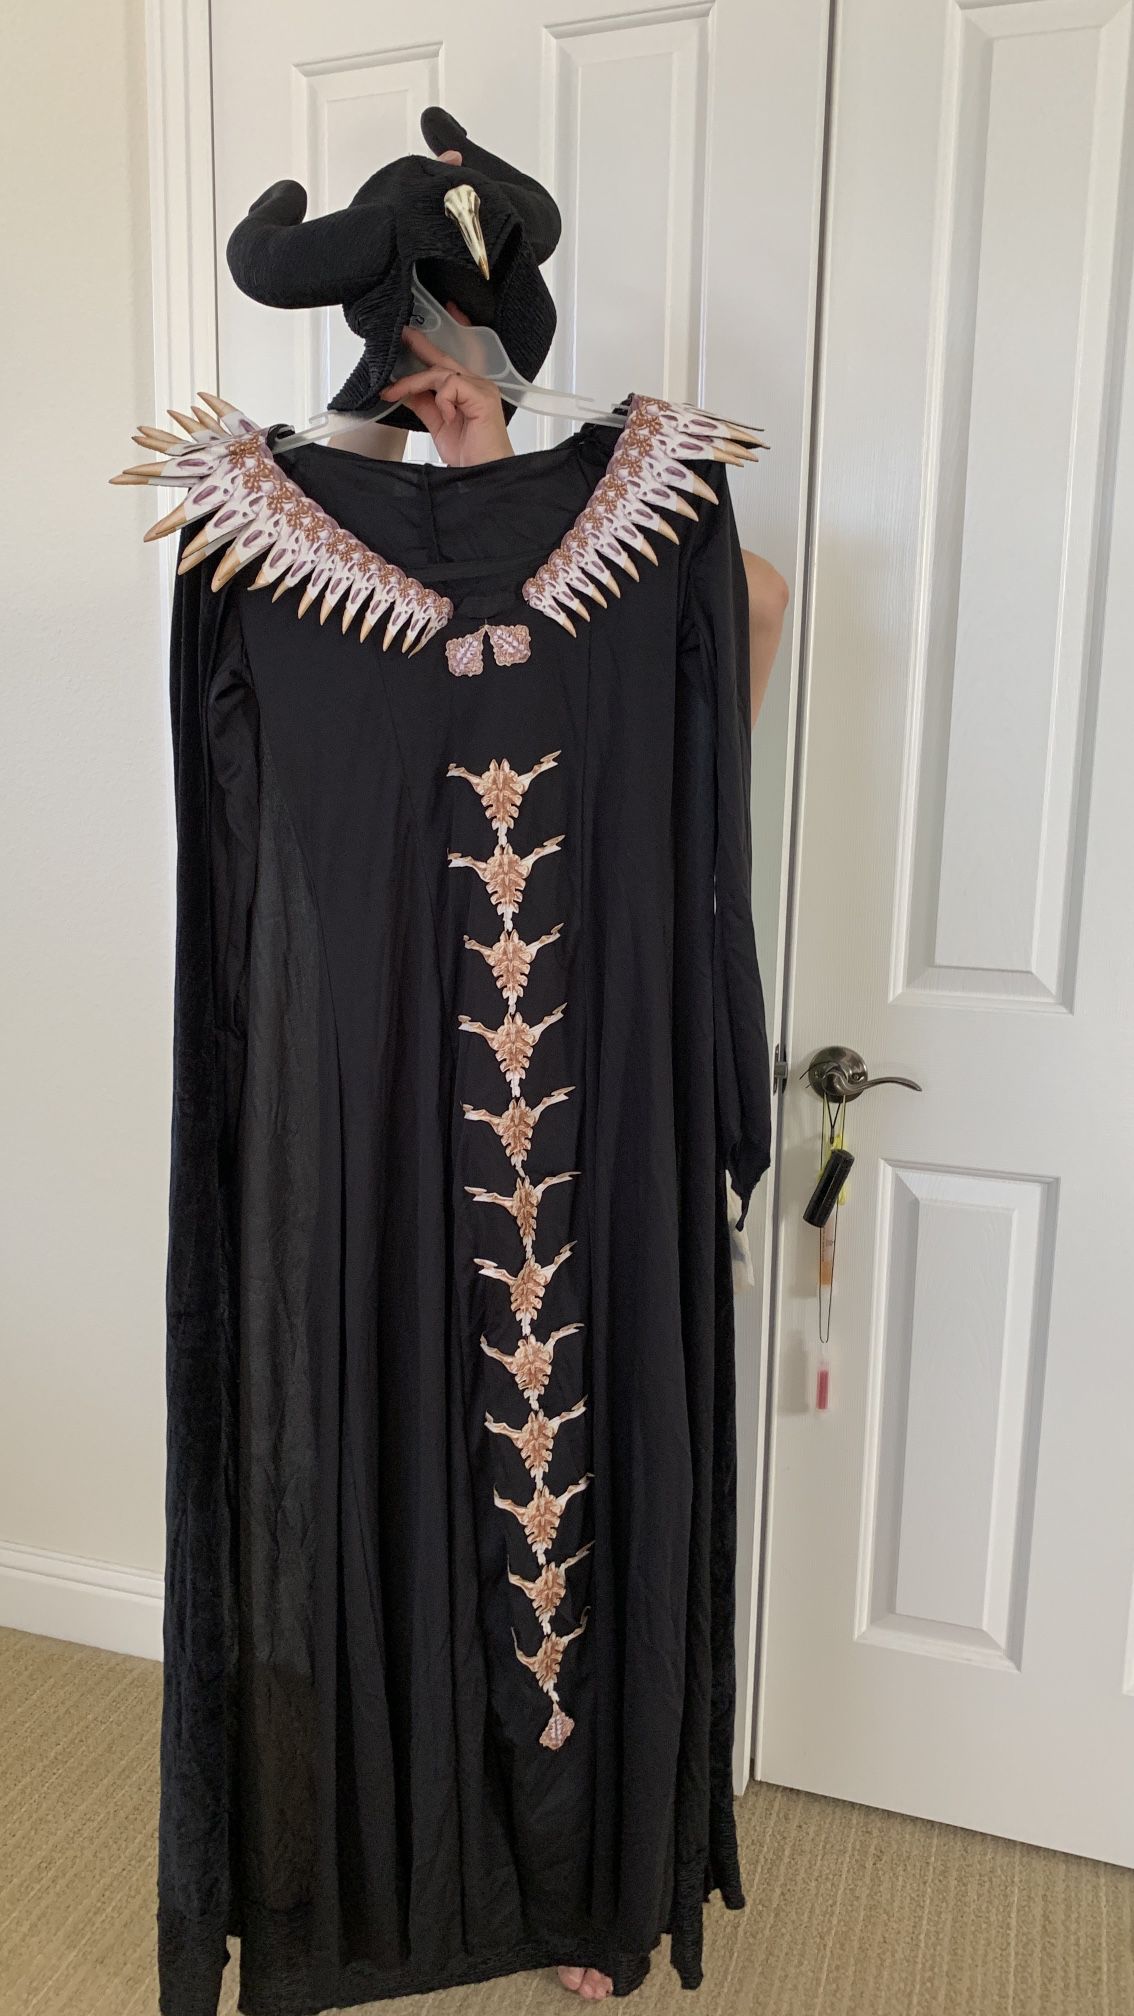 Maleficent robes - used - size L 